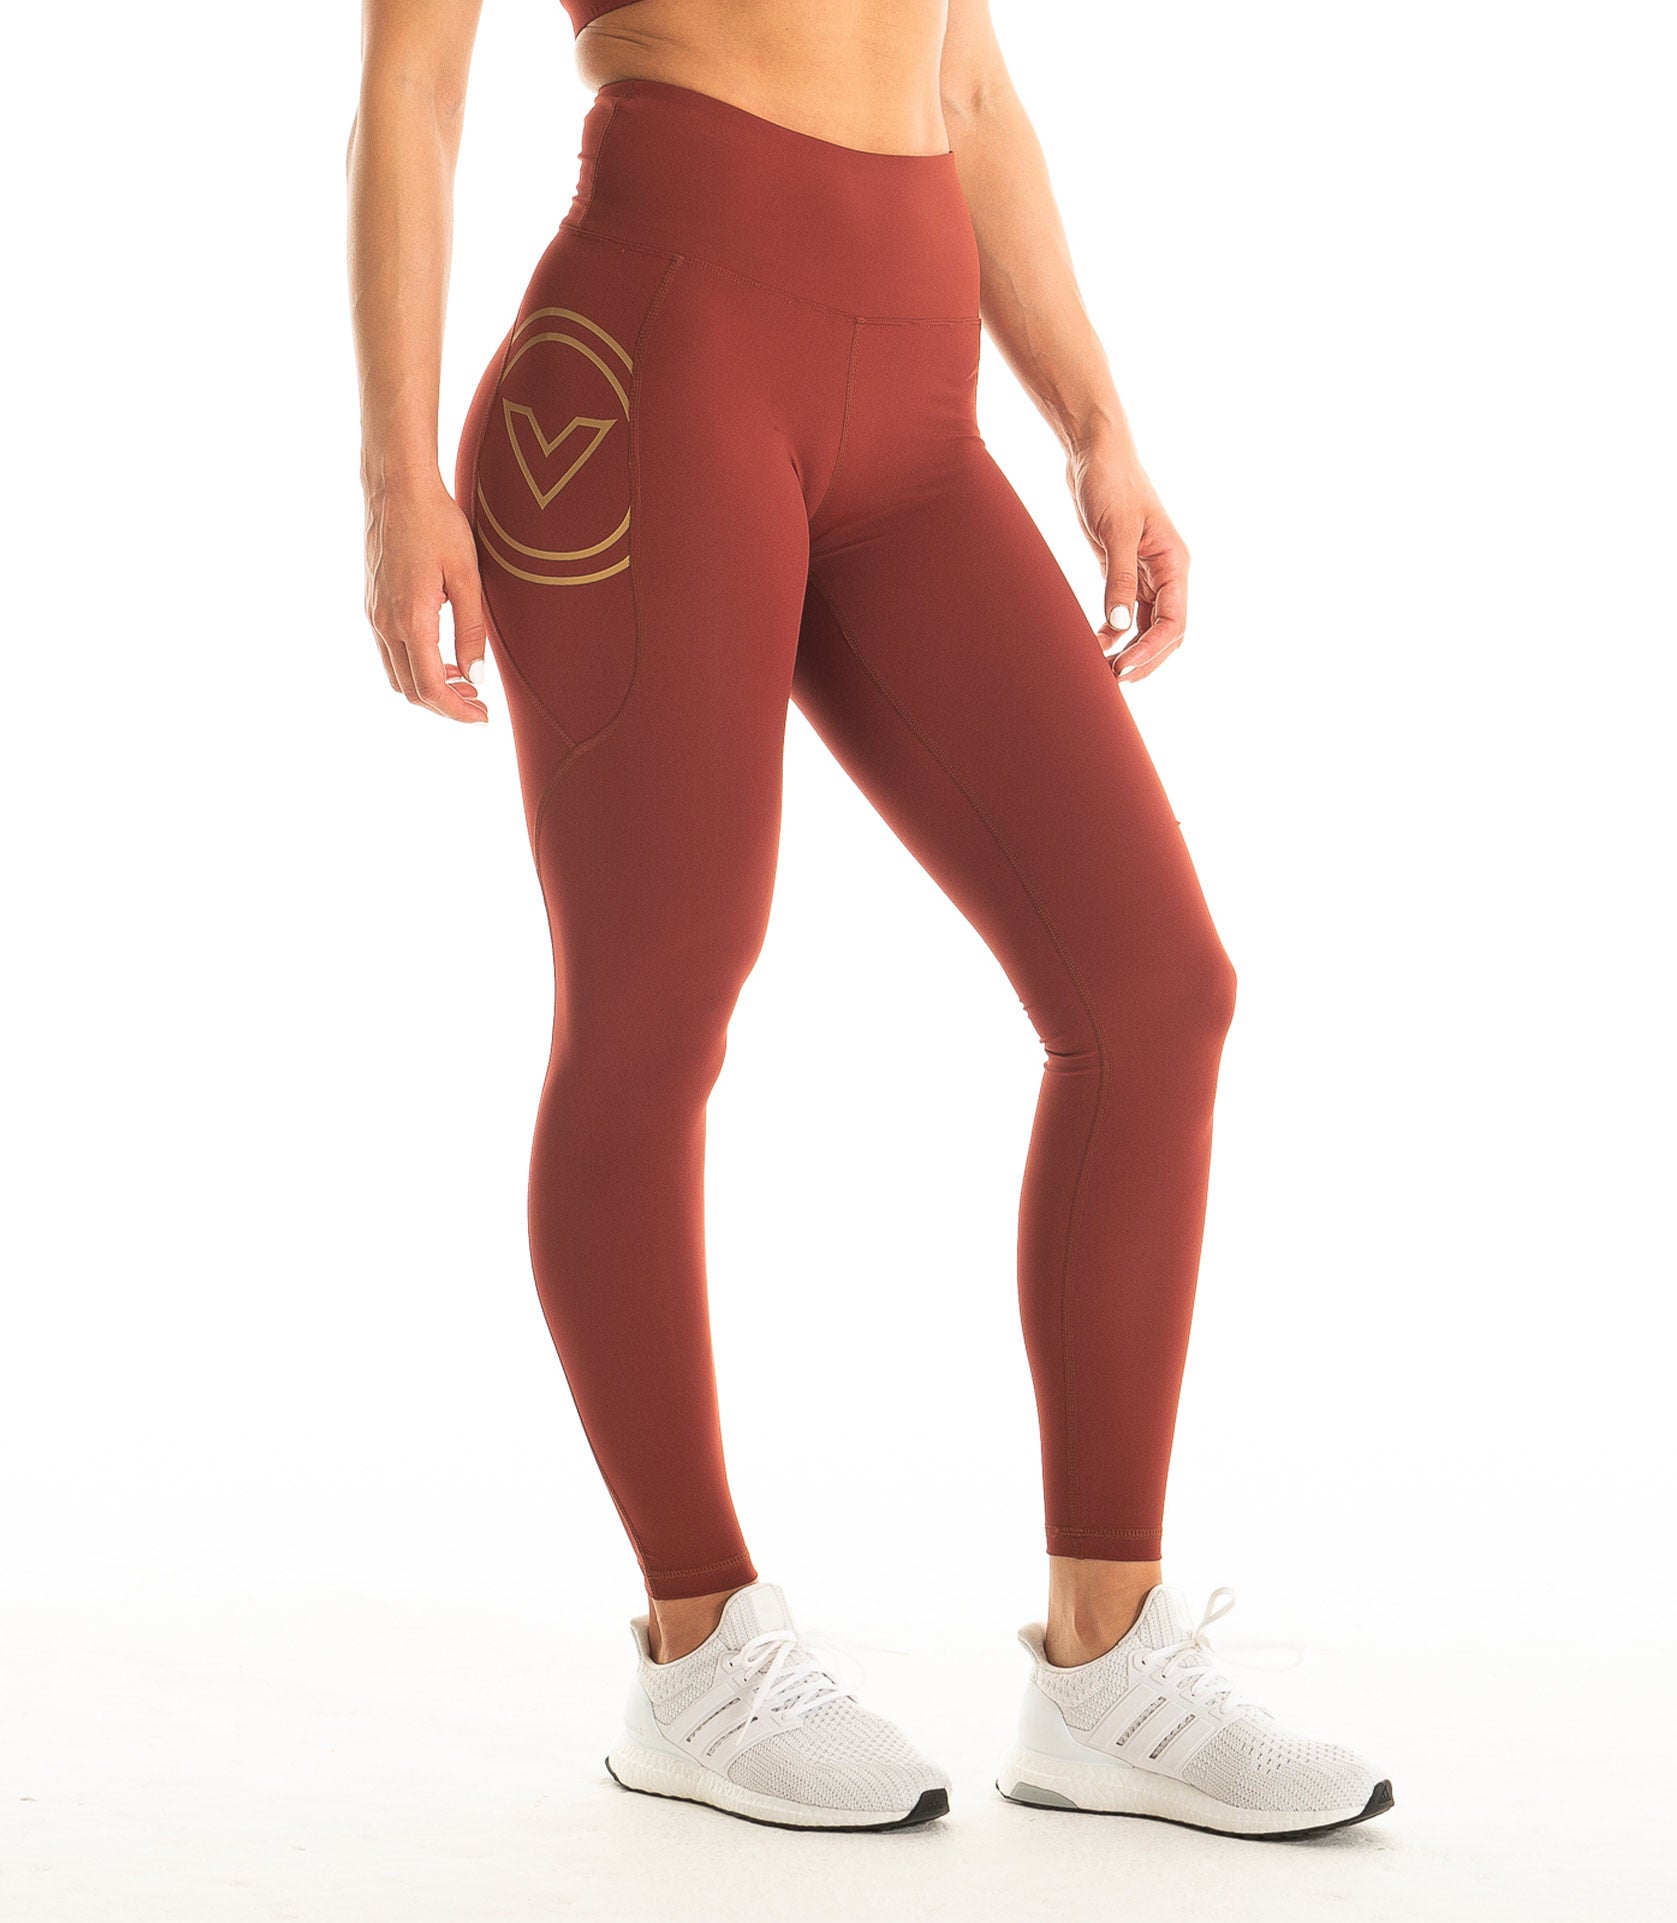 WOMEN'S STAY COOL V2 COMPRESSION PANT- MAROON - Force Sports Store